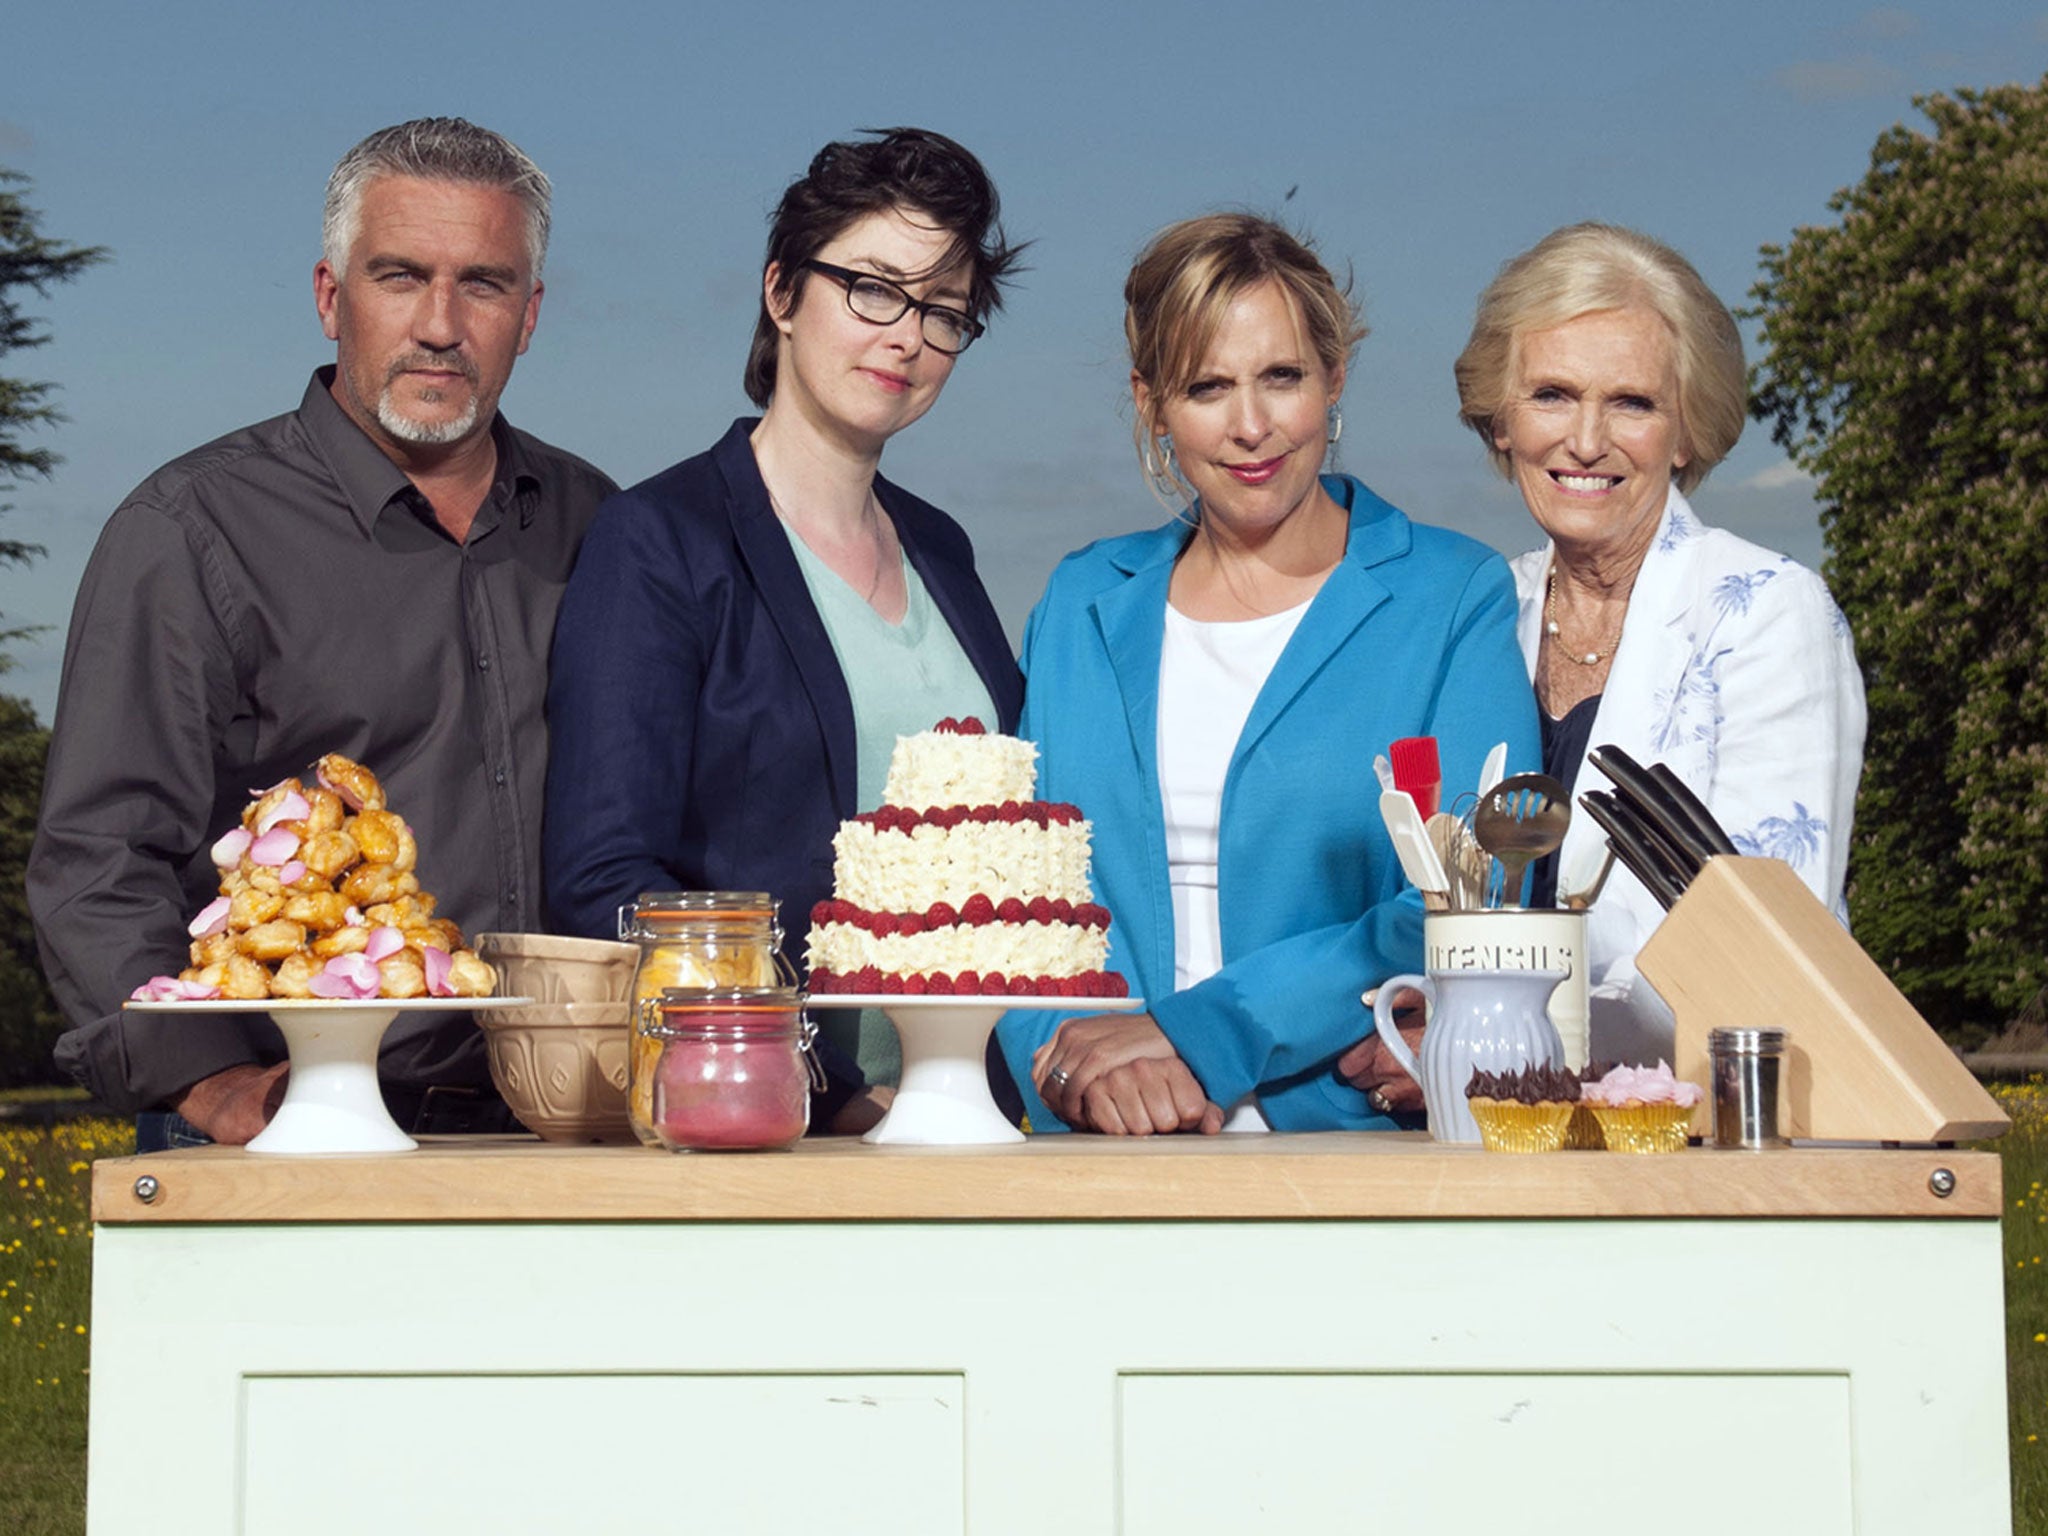 The Great British Bake Off final drummed up an audience of more than 9 million